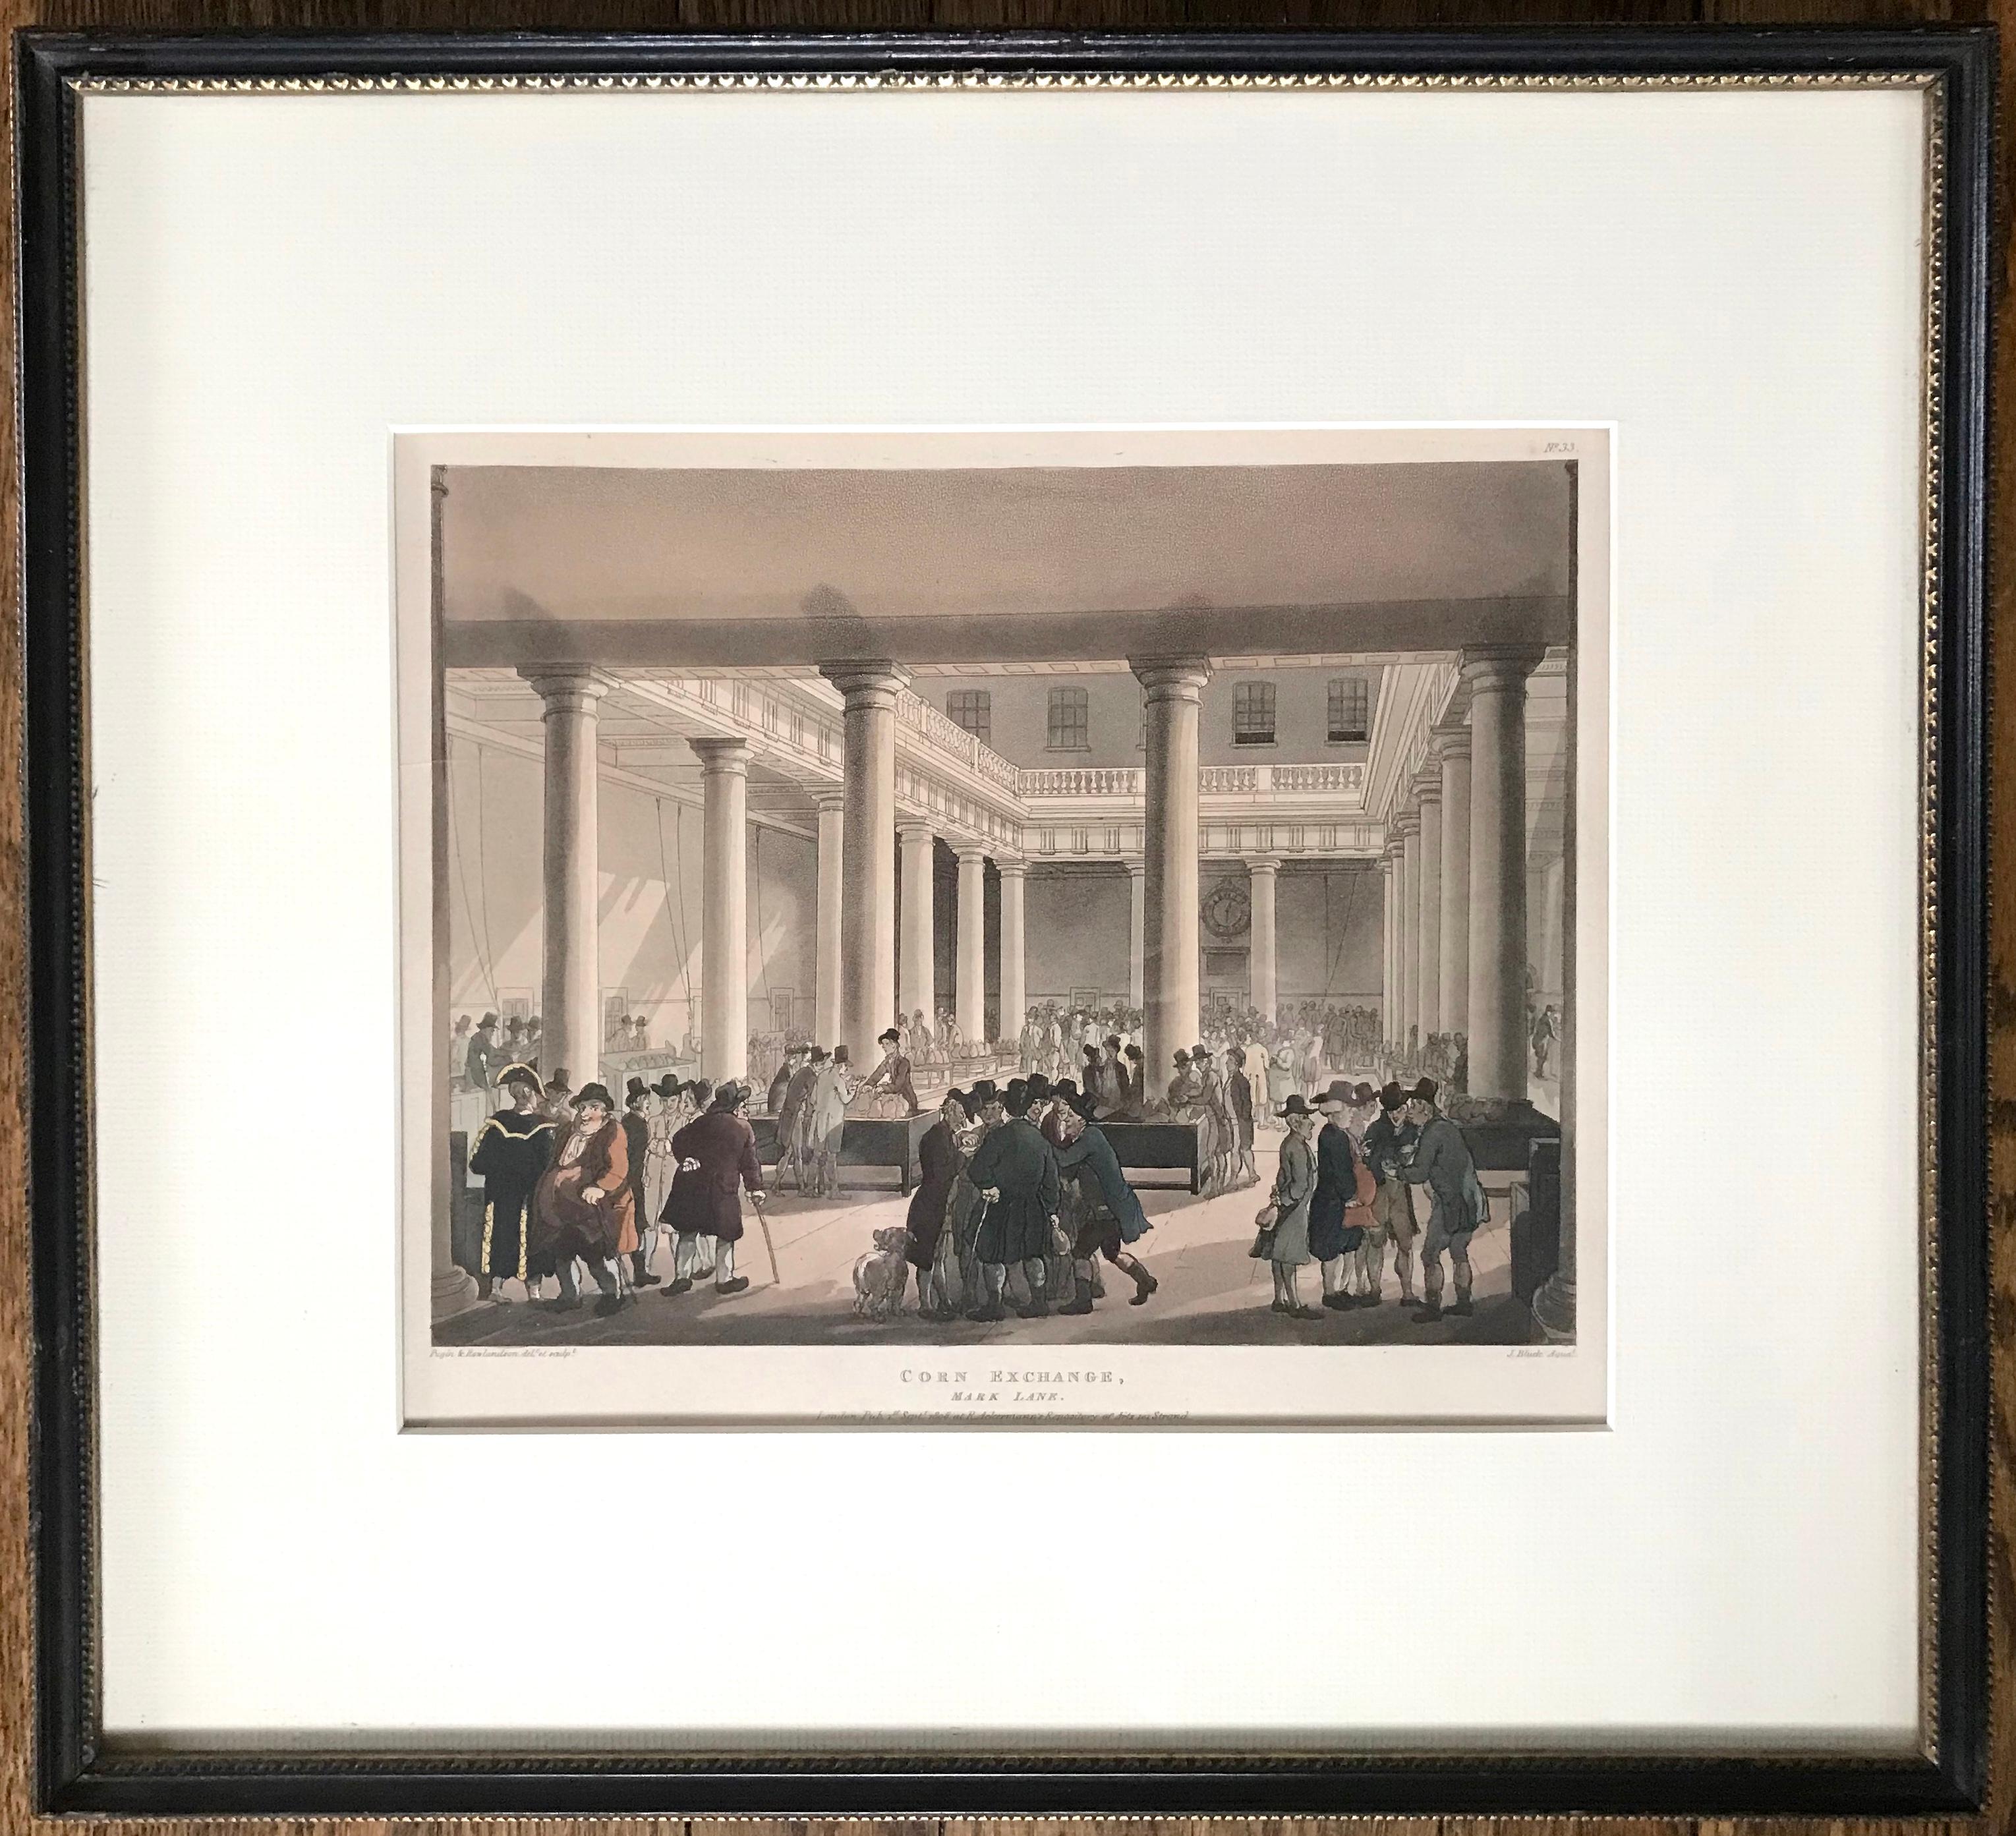 Set of four Regency era coloured engravings by Rowlandson. Four framed coloured engravings of Regency London landmarks including the Corn Exchange, by Rowlandson, circa 1808.
Dimensions: 17.25